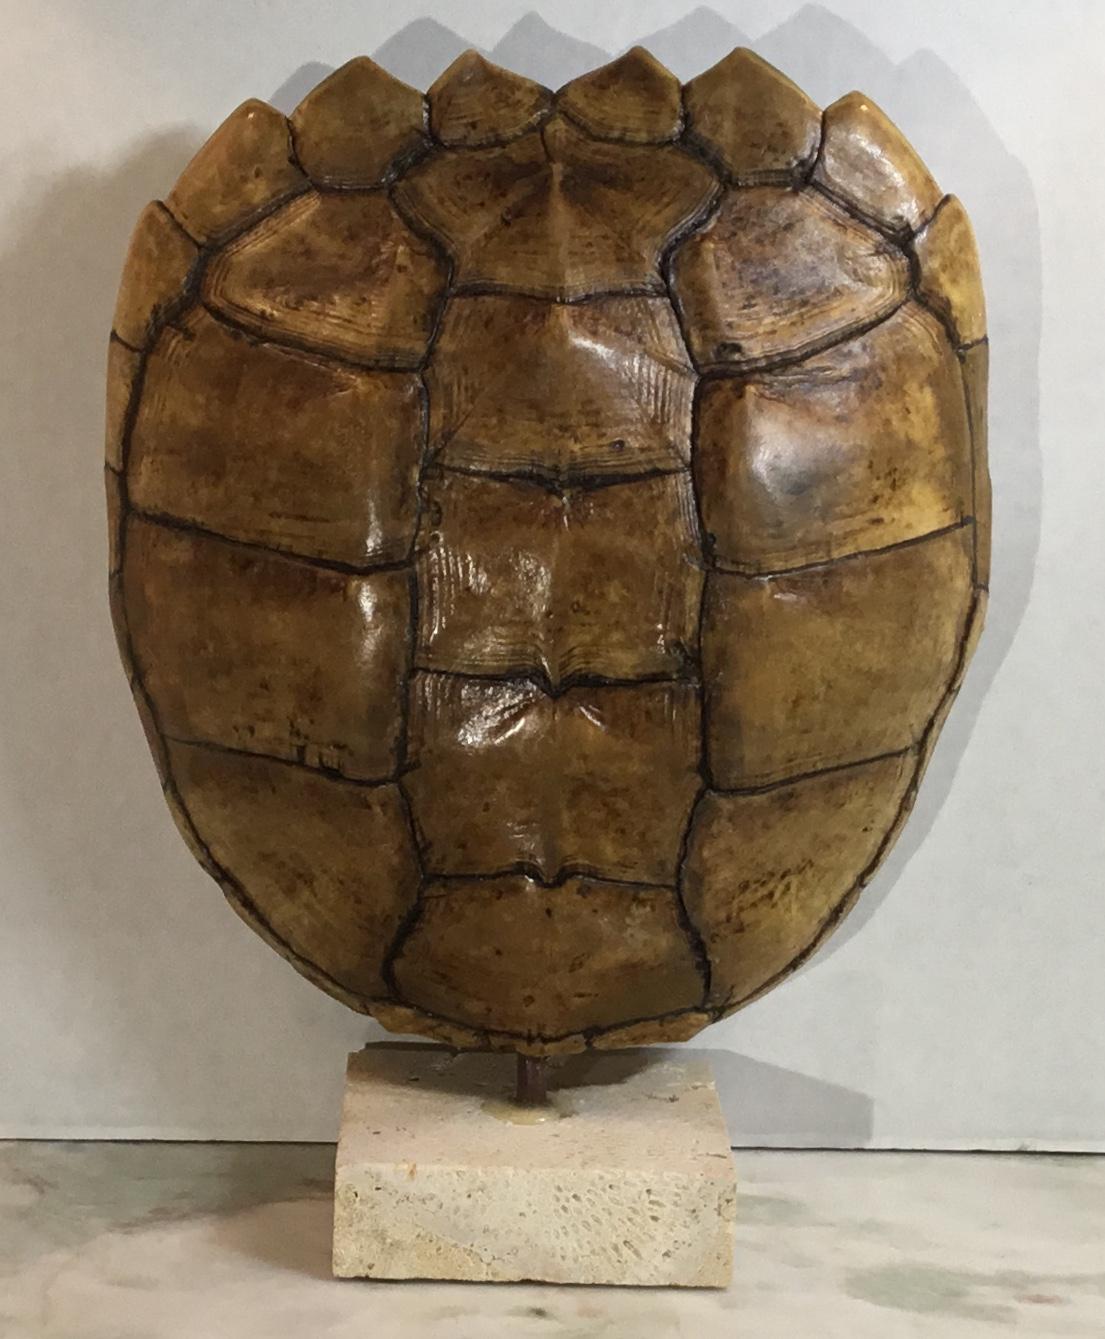 Decorative fresh water turtle shell professionally mounted on coral
base, the shell is cleaned and seal with clear protective satin finish.
And the back is upholstered with silk fabric. Beautiful natural piece of art for display.